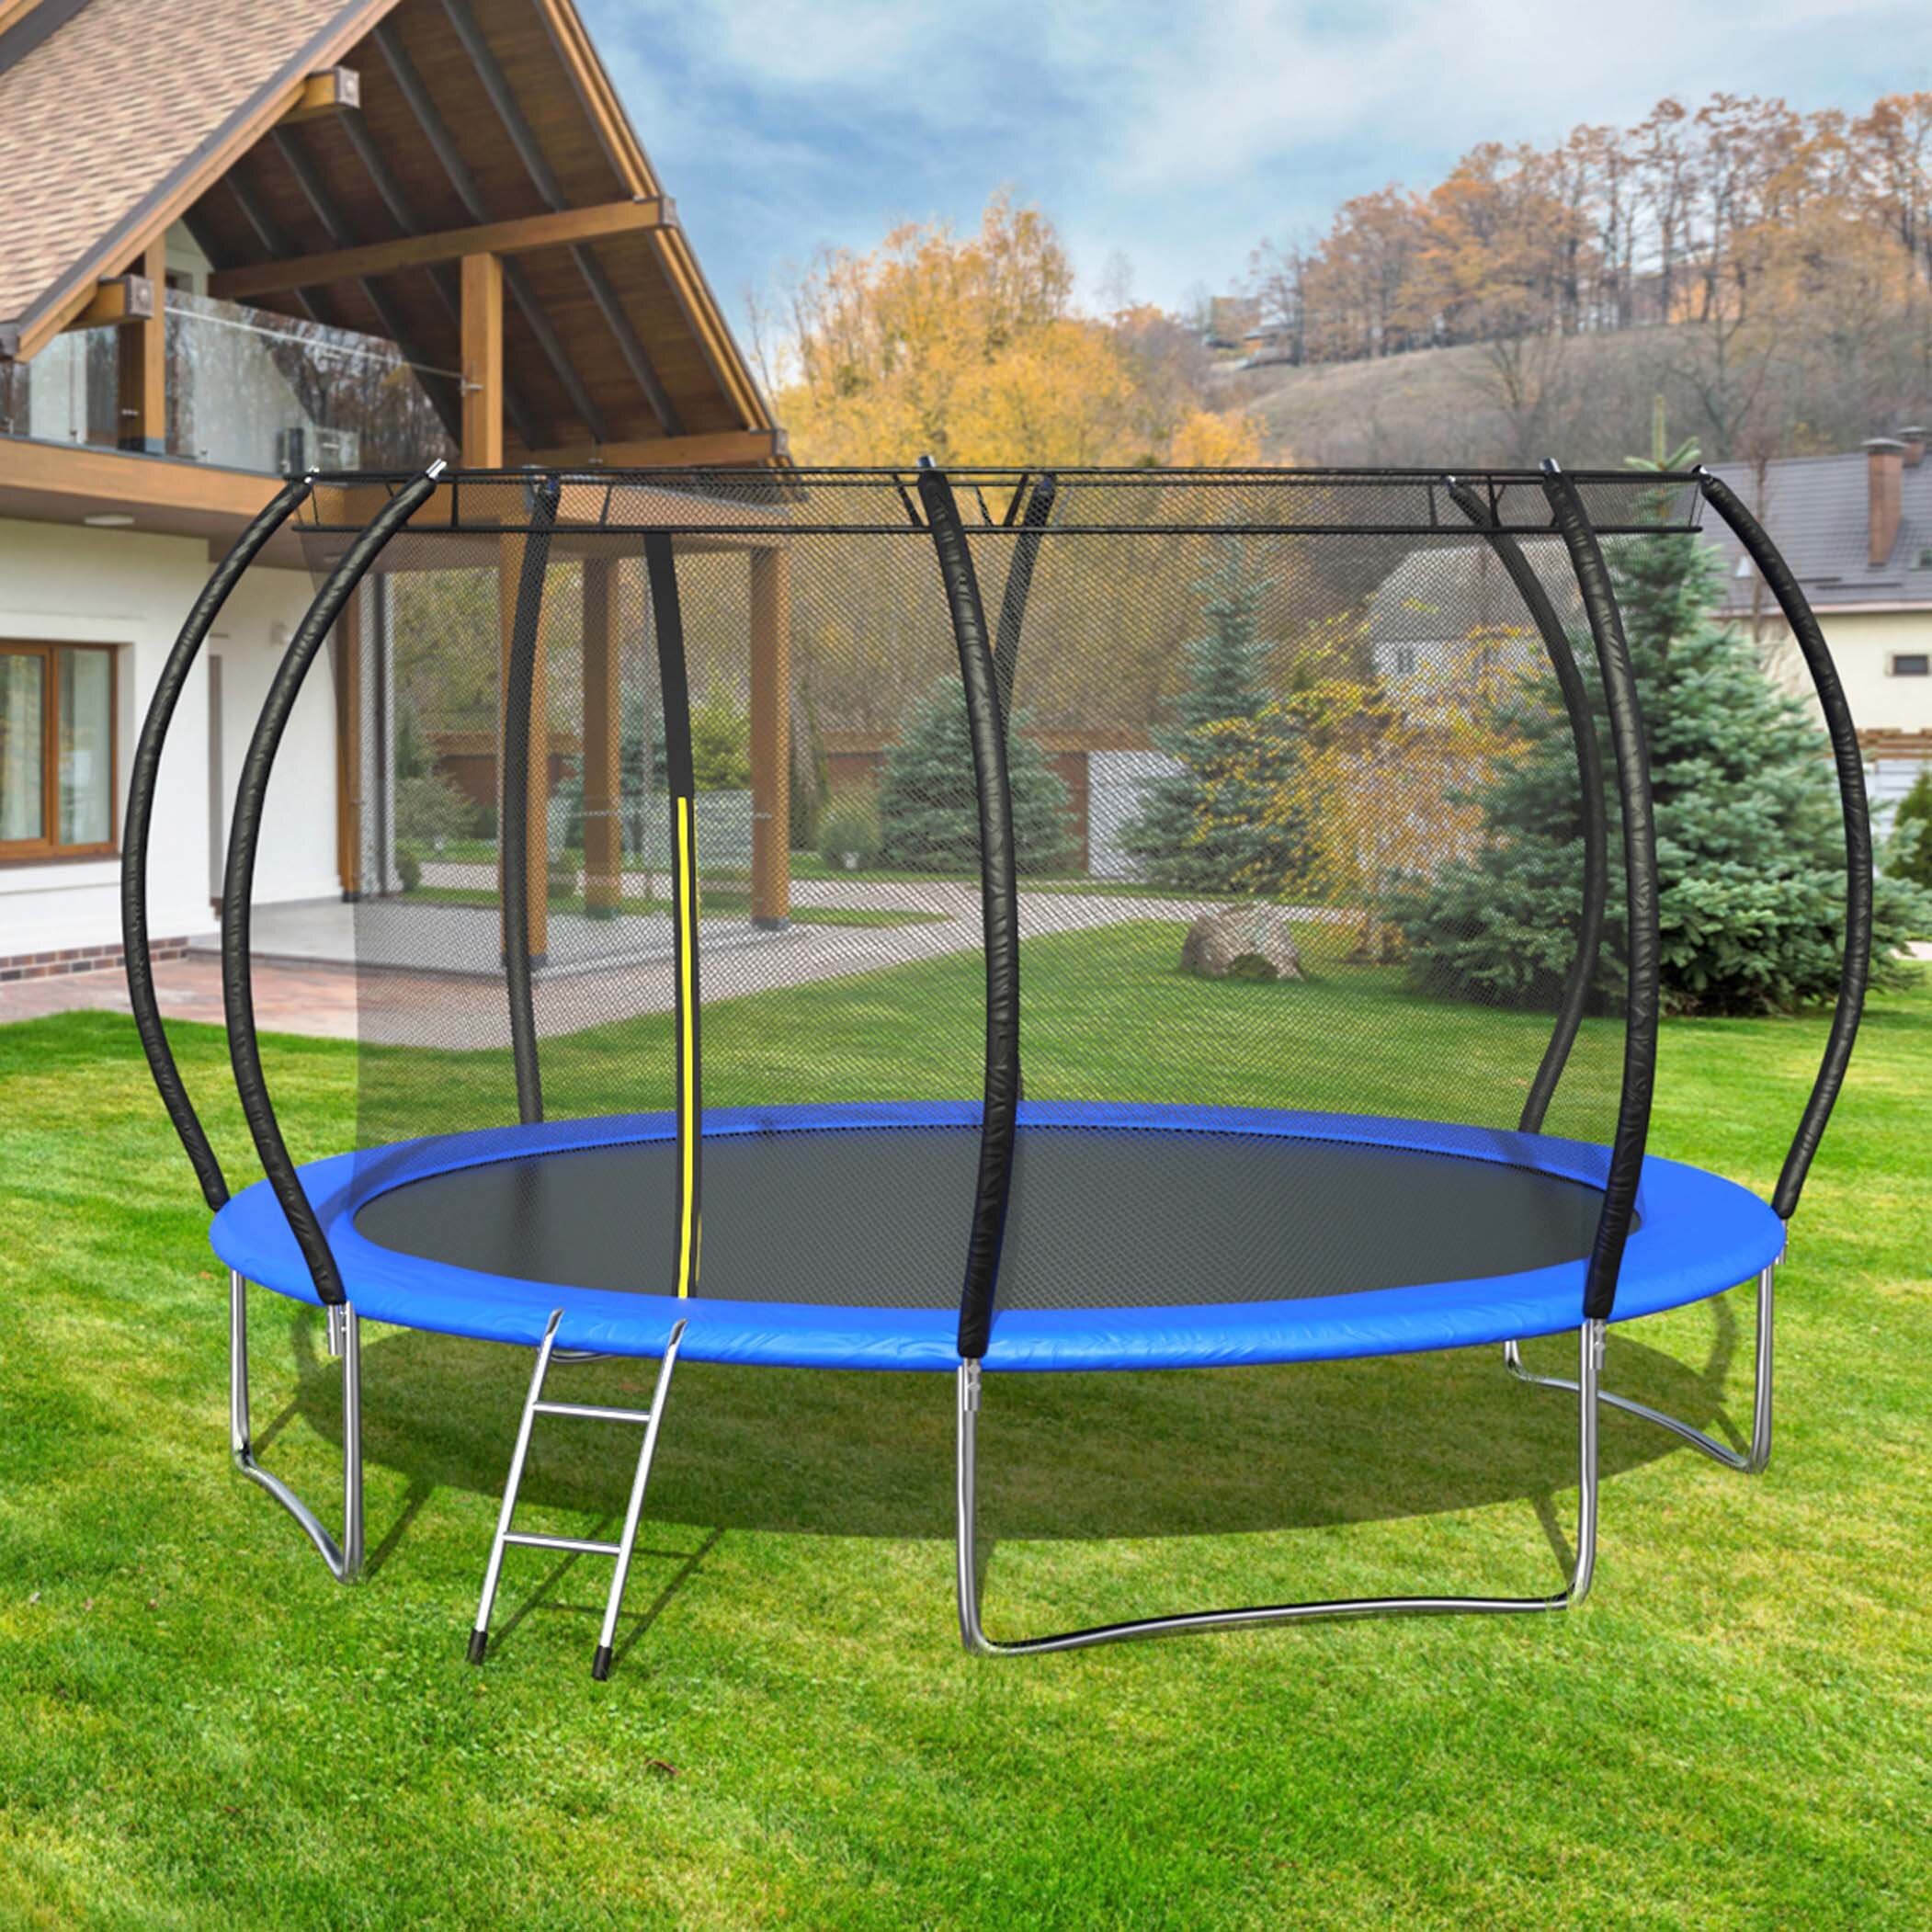 8FT Trampoline Combo Bounce Jump Safety Enclosure Net w/ Spring Pad Ladder Jumpe 